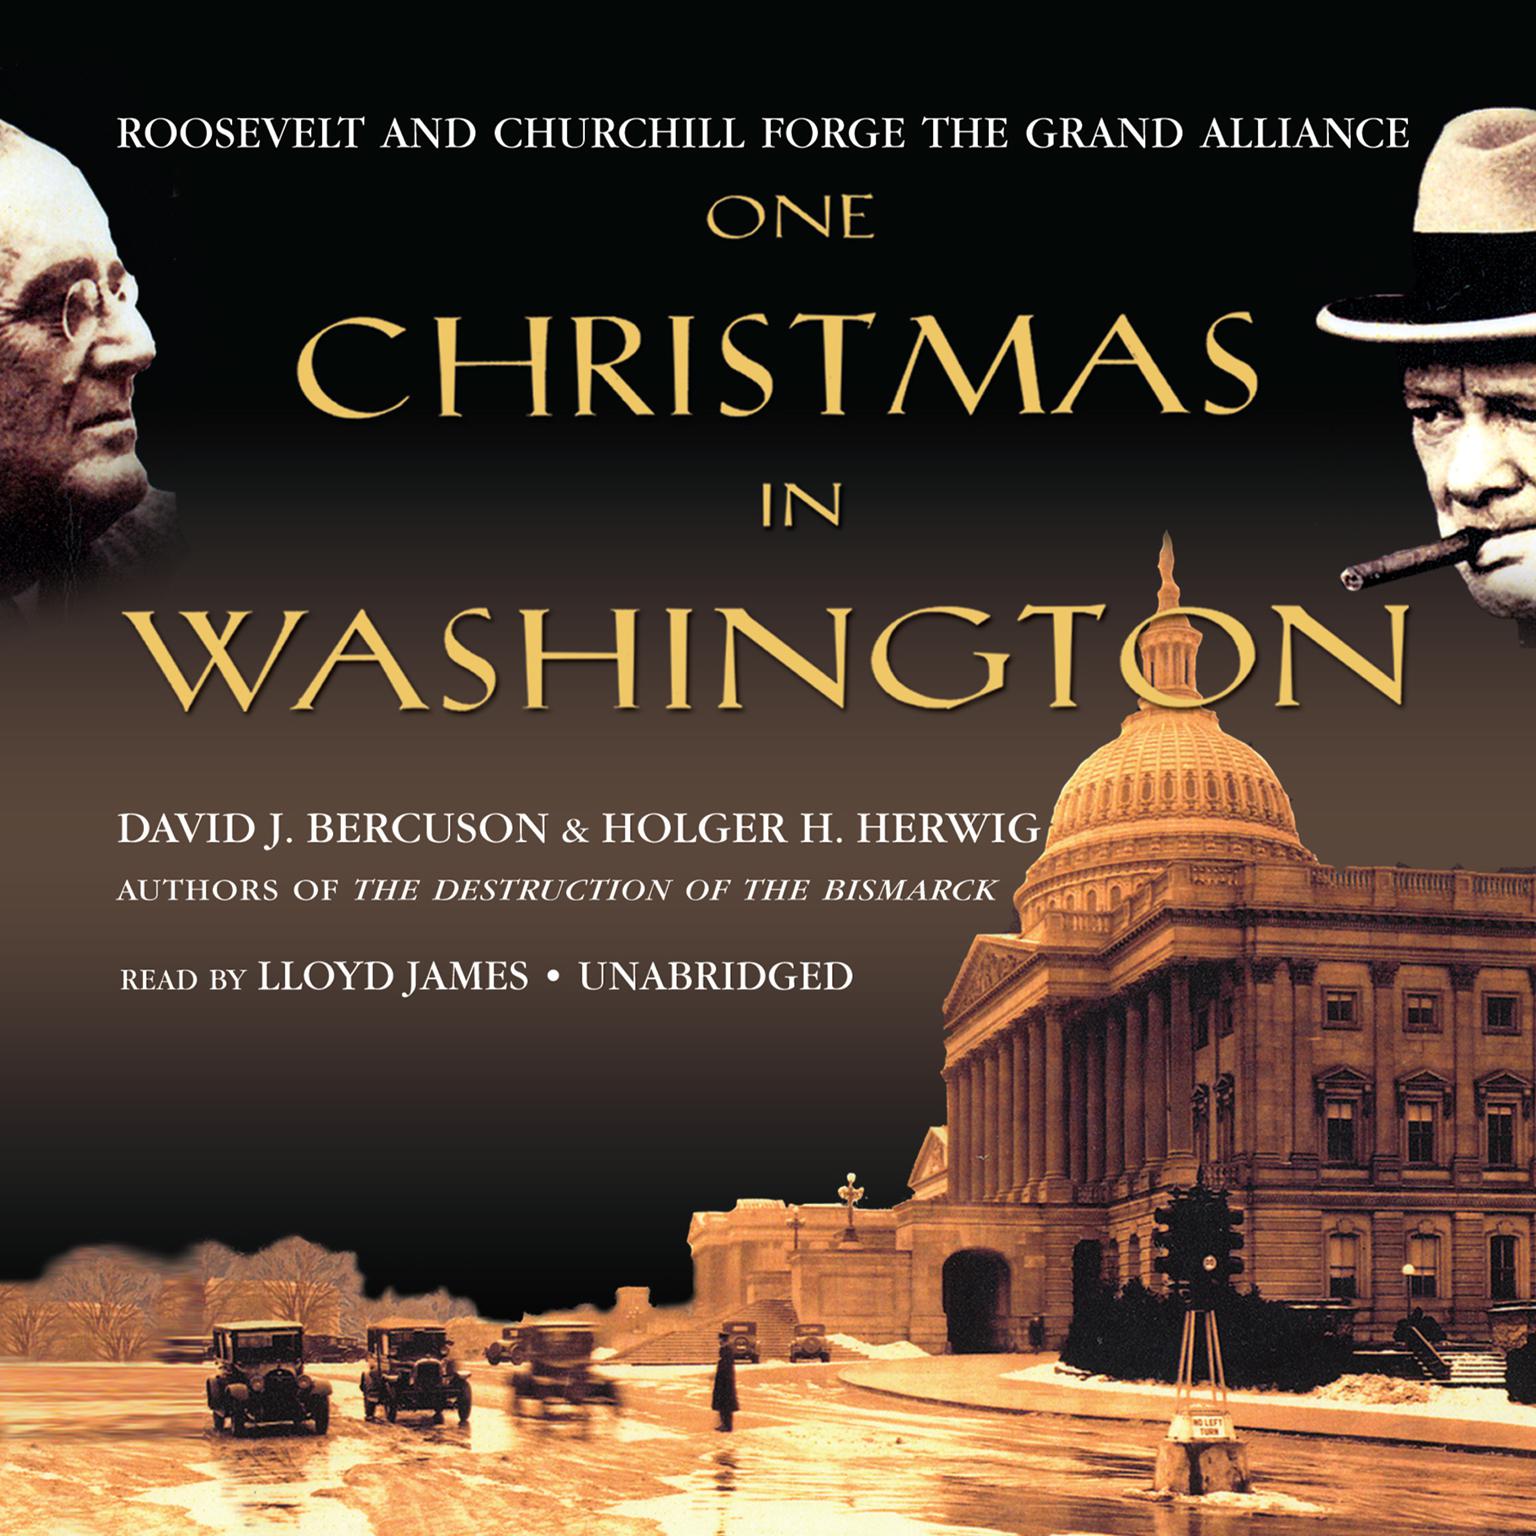 One Christmas in Washington: Roosevelt and Churchill Forge the Grand Alliance Audiobook, by David Bercuson